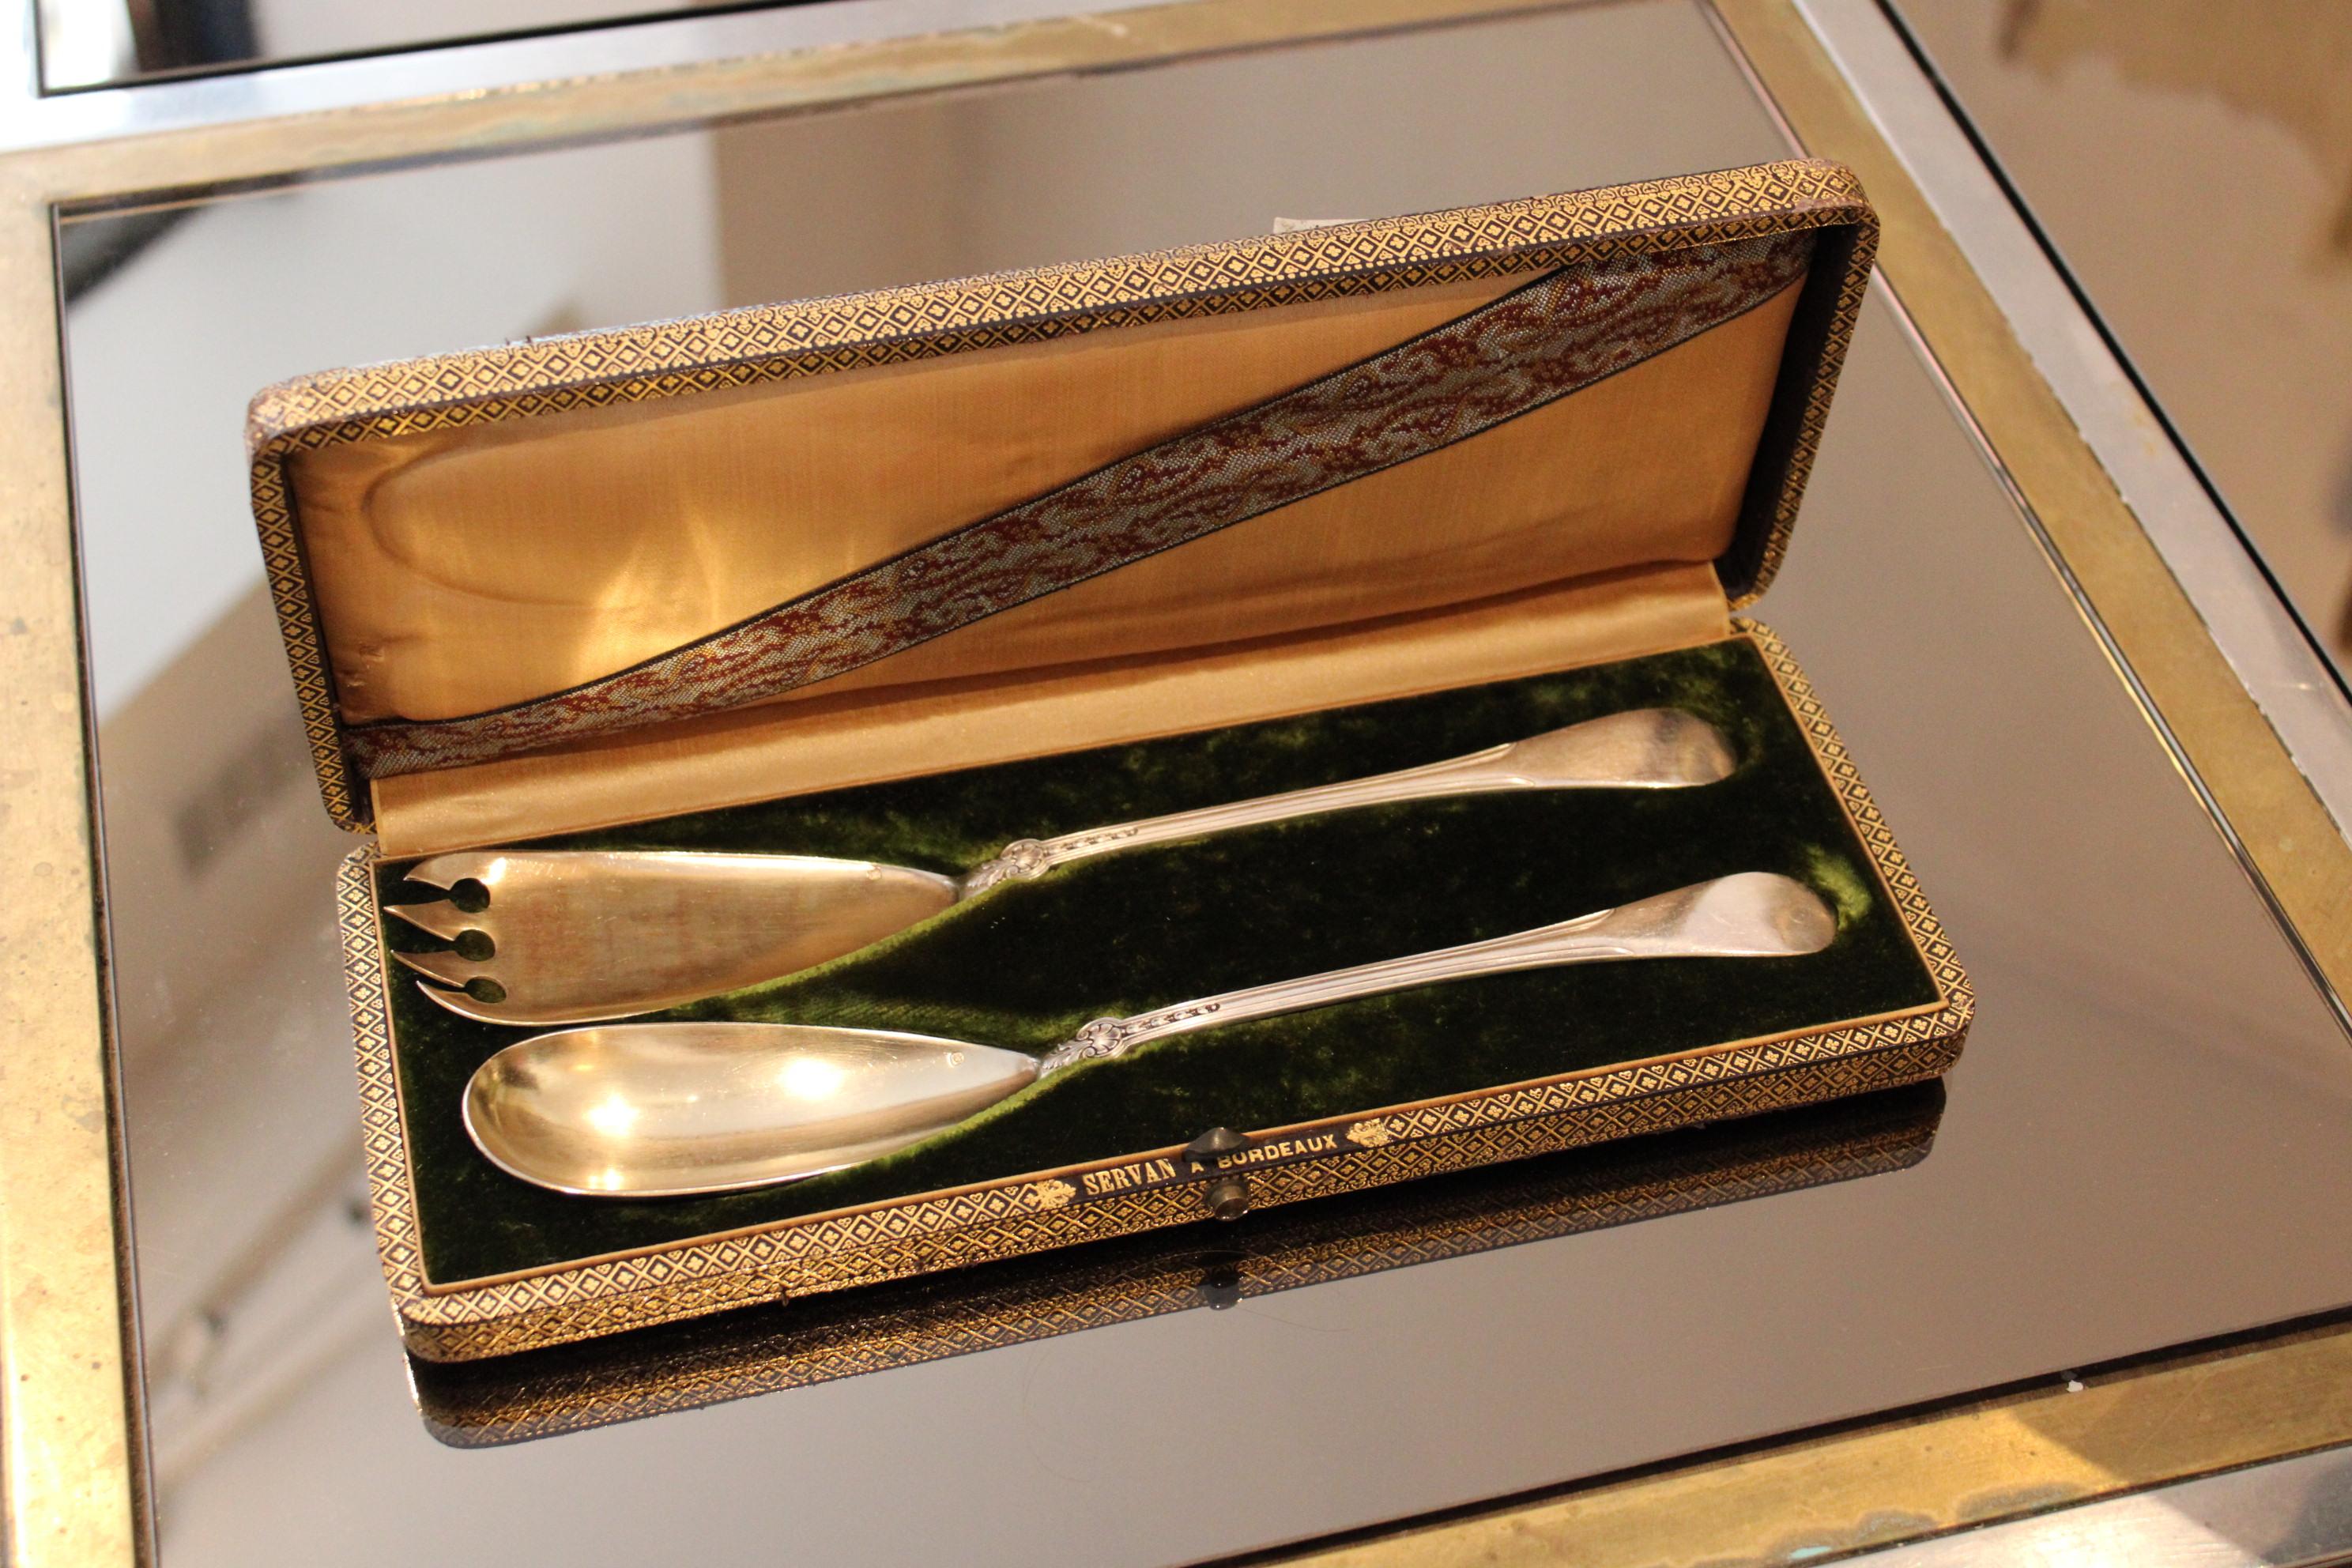 Solid silver cutlery in a box.
